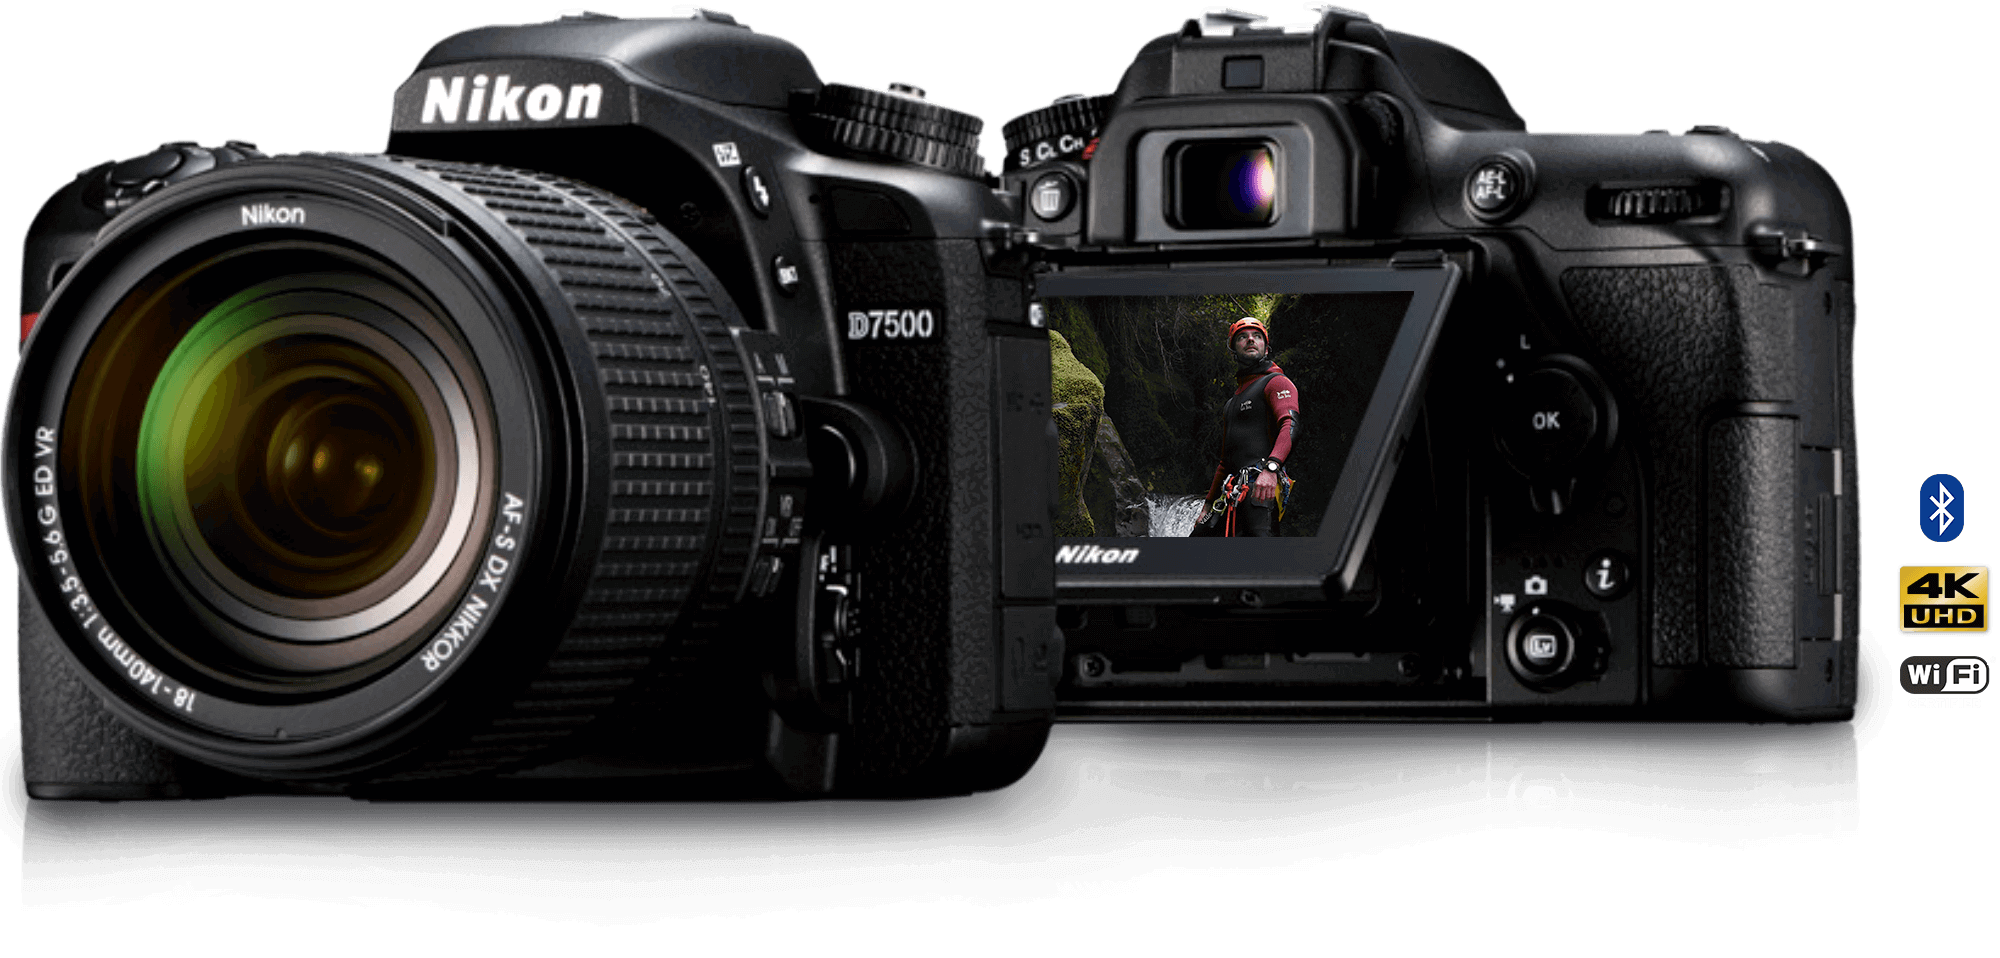 Buy Nikon D7500 DSLR Camera 18-140mm Lens With Warranty at Best Price In Pakistan | Telemart